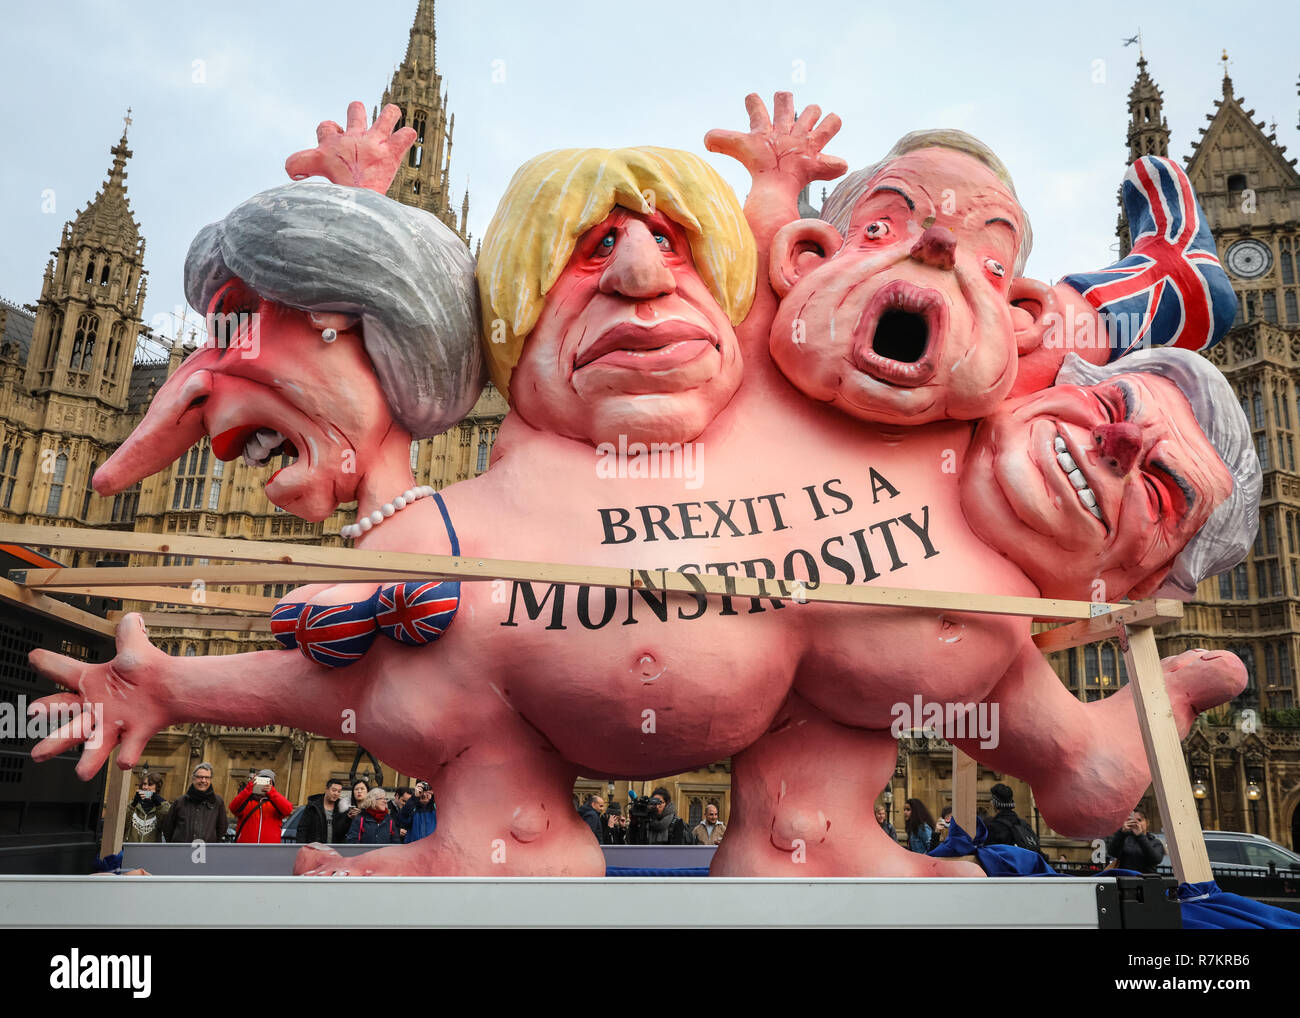 Westminster London, UK, 8th Dec 2018. A 'Breit is a Monstrosity political cartoon sculpture,is transported around Westminster on a van. Activists from both the Remain or 'Anti-Brexit' side, as well as campaigners for 'Leave means Leave ' ,who want to leave the EU, are protesting outside the Houses of Parliament in Westminster with placards, banners and chants. Both sides appear to vocally reject the current Brexit 'deal' offered. Credit: Imageplotter News and Sports/Alamy Live News Stock Photo